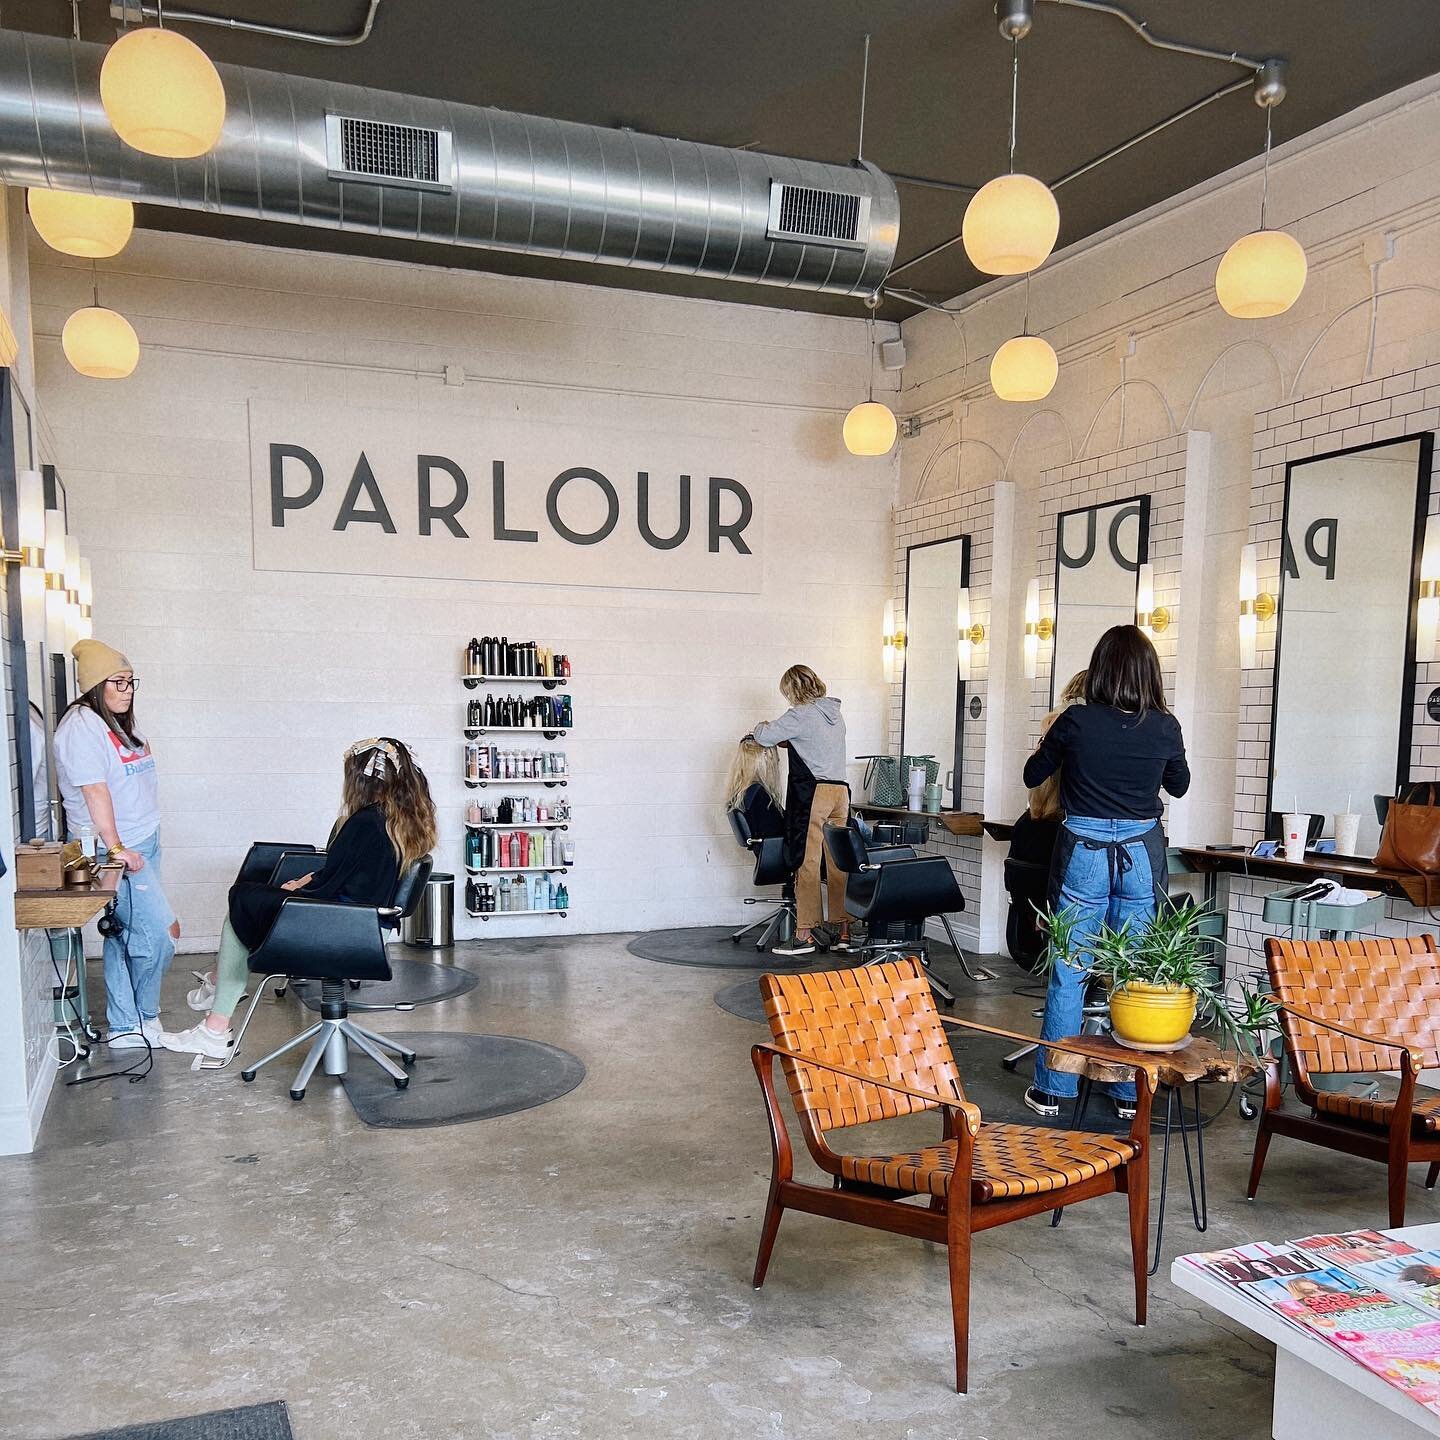 Hello to all our new followers! Welcome to Sugarhouse Parlour ✨ We&rsquo;re a woman-owned salon in the heart of Sugarhouse located down a charming alleyway that makes us feel like we&rsquo;re a hidden gem 💎

We&rsquo;ve been here since 2014 and have